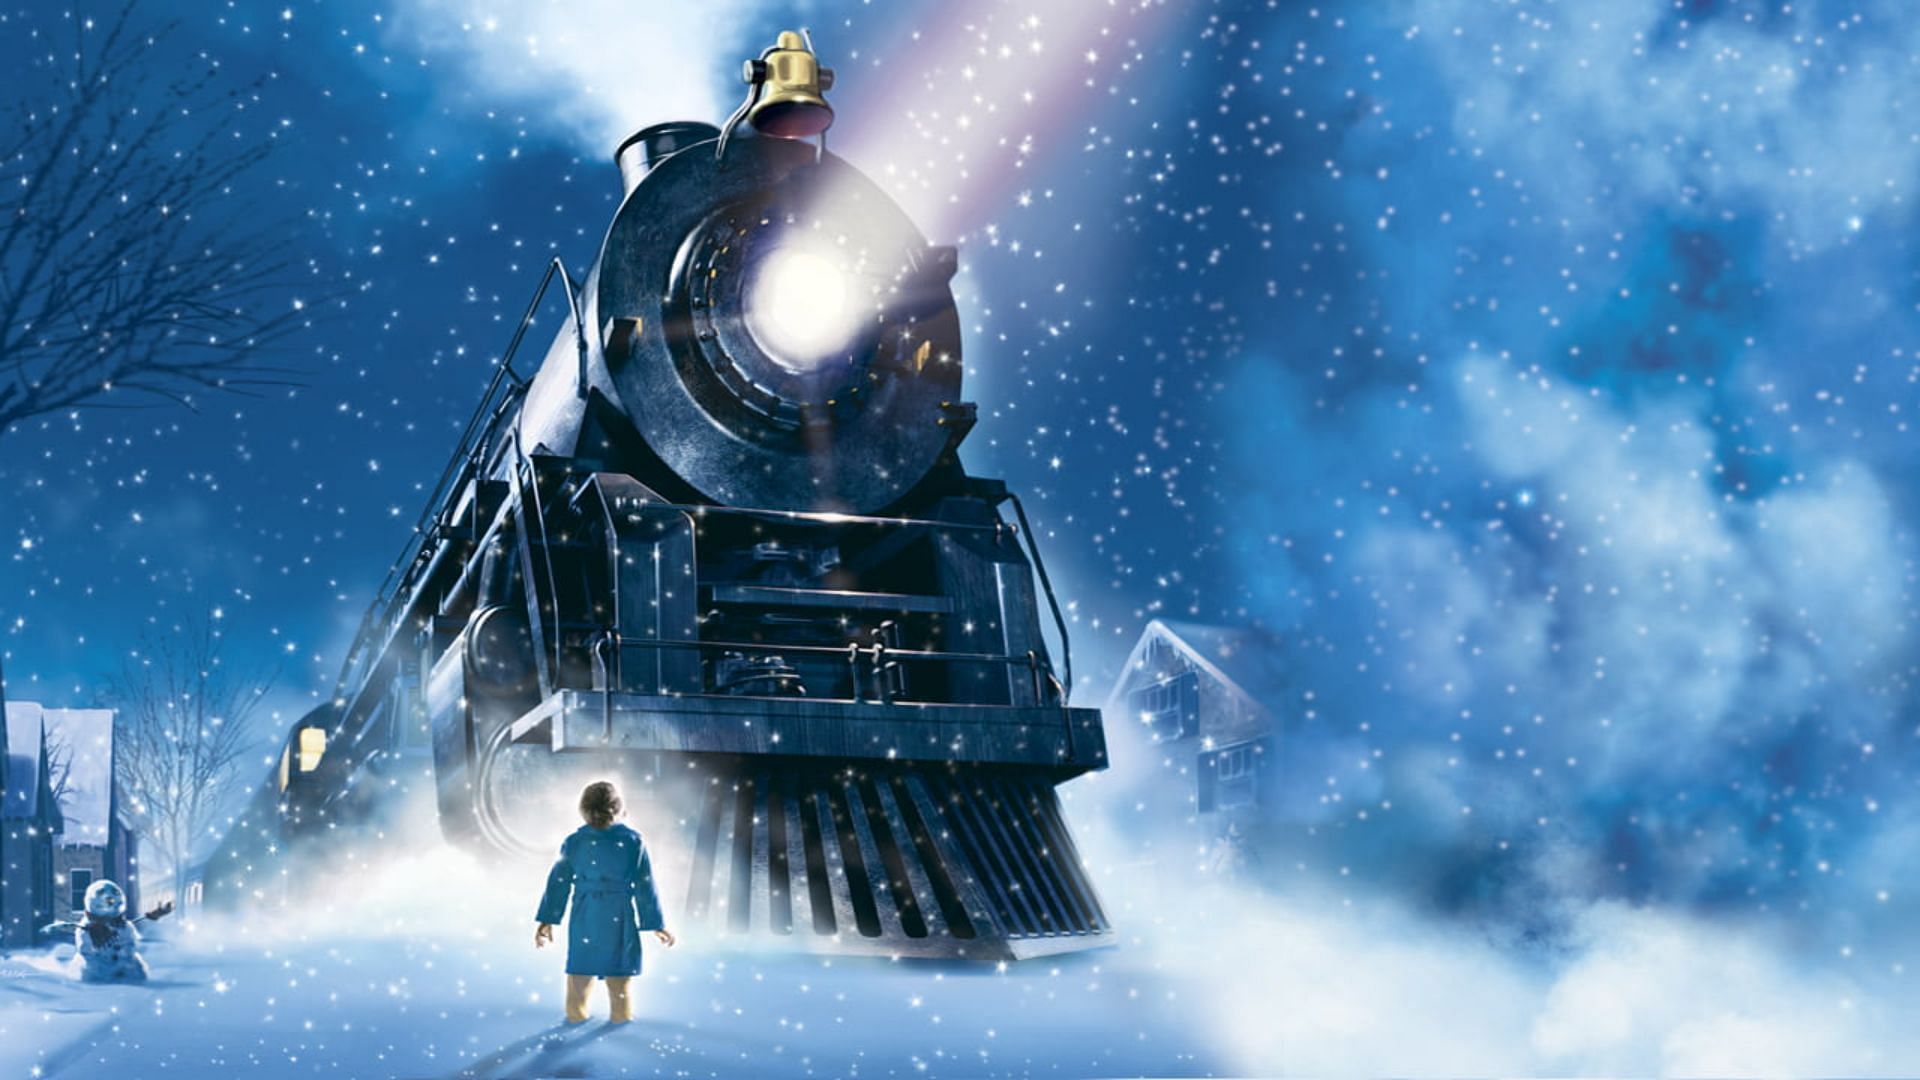 Fortnite x Polar Express collaboration would have been perfect for Winterfest 2023